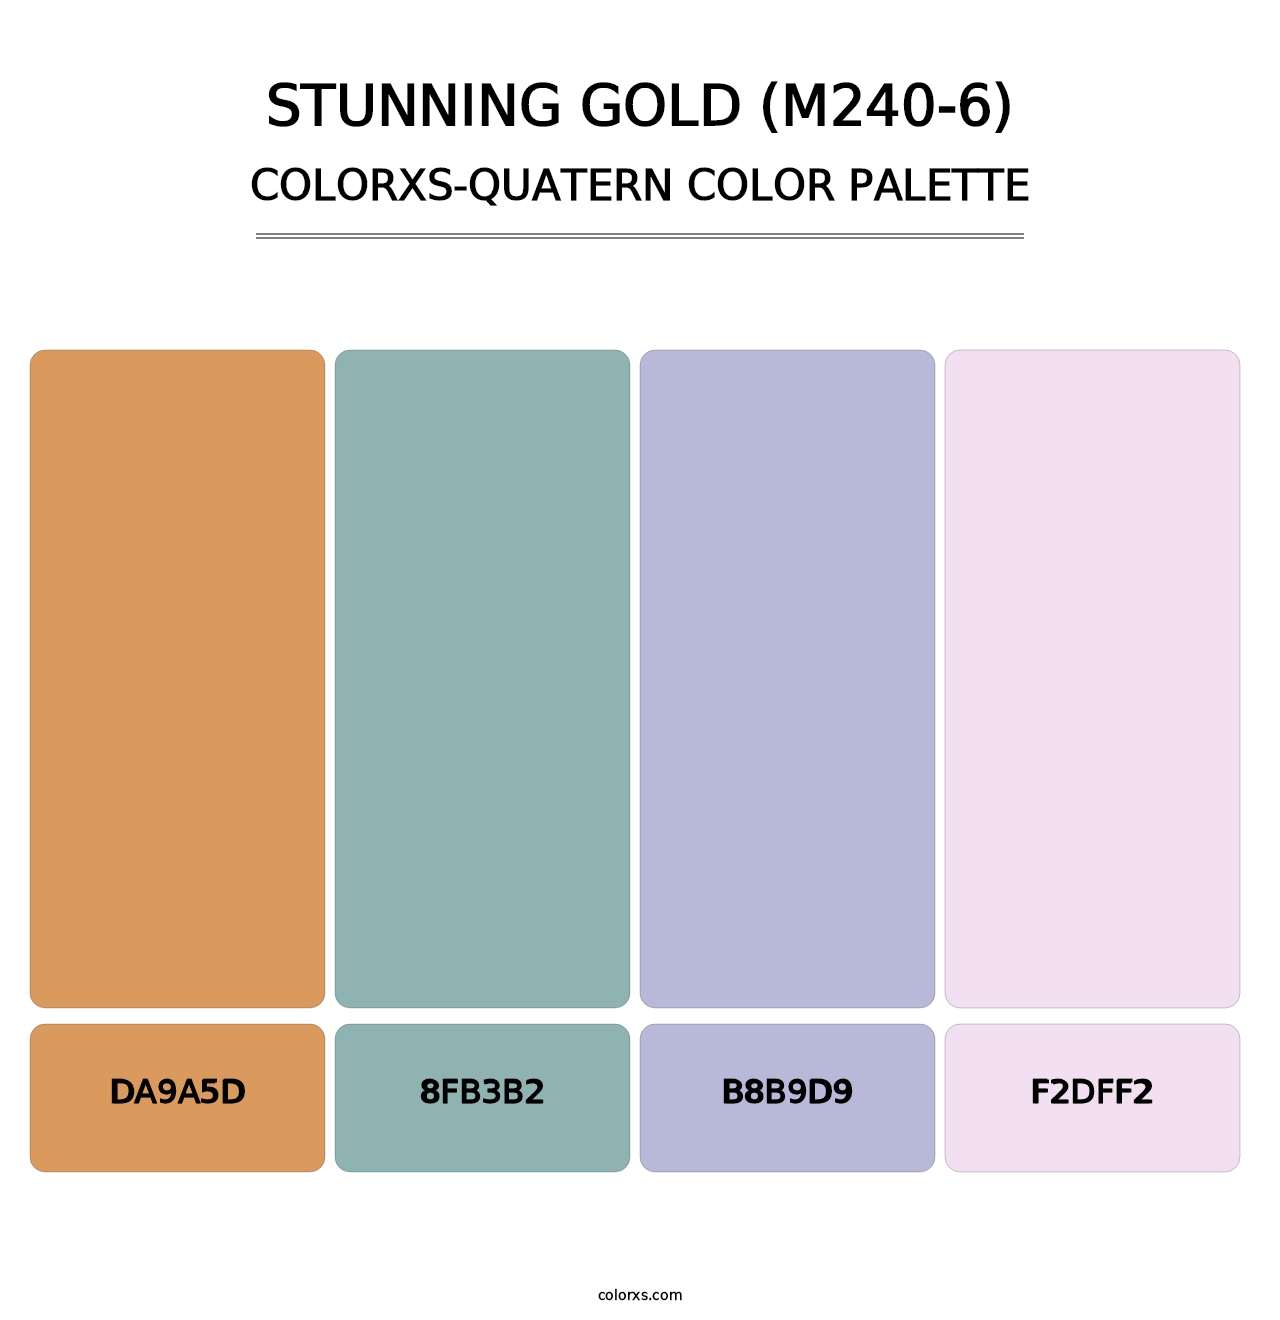 Stunning Gold (M240-6) - Colorxs Quatern Palette